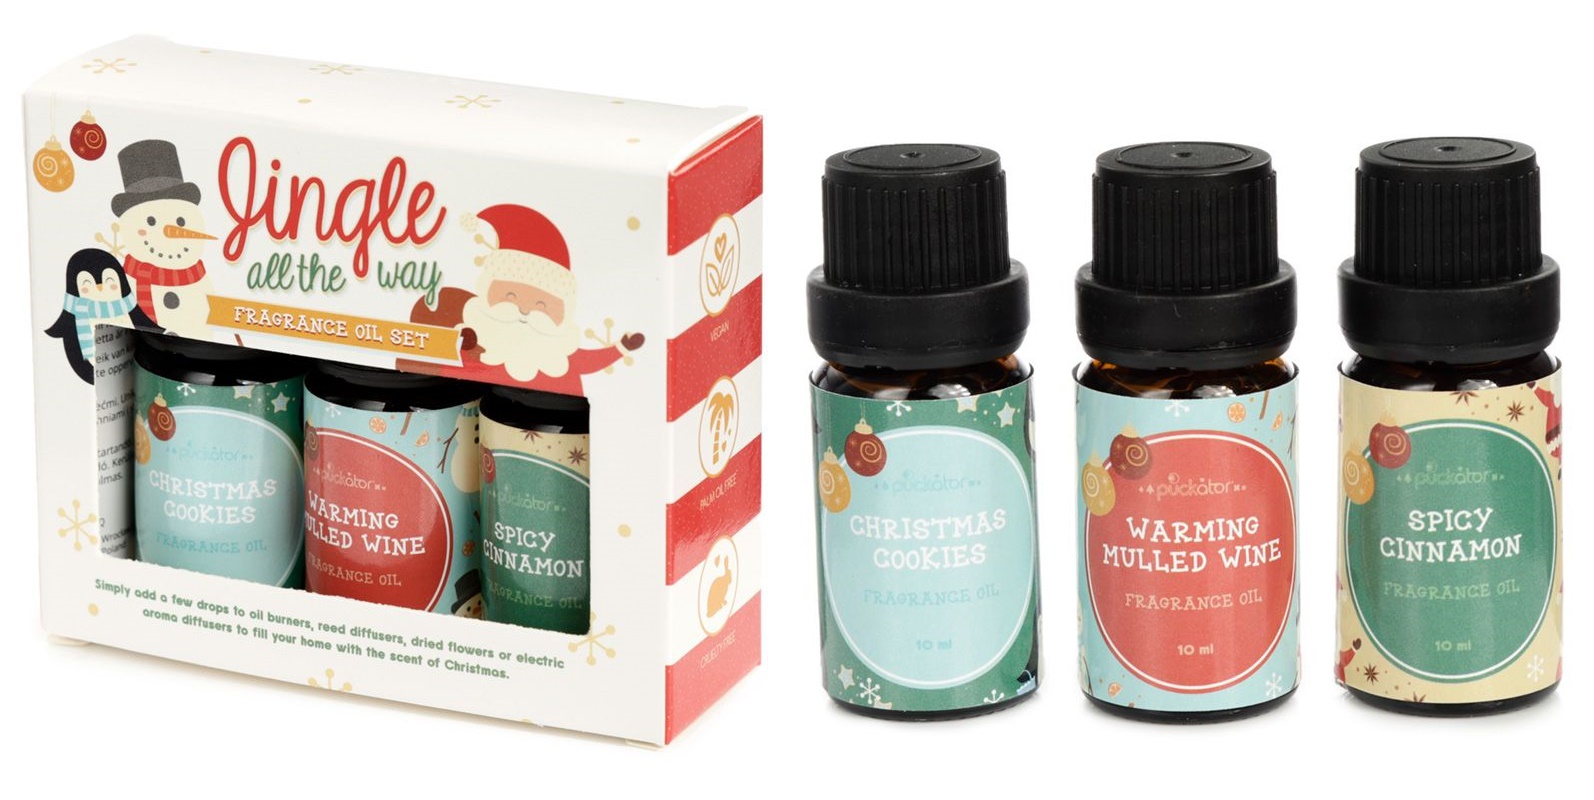 Set of Christmas Fragrance Oils - Spicy Cinnamon, Warming Mulled Wine, Christmas Cookie - Set of 3 Oils